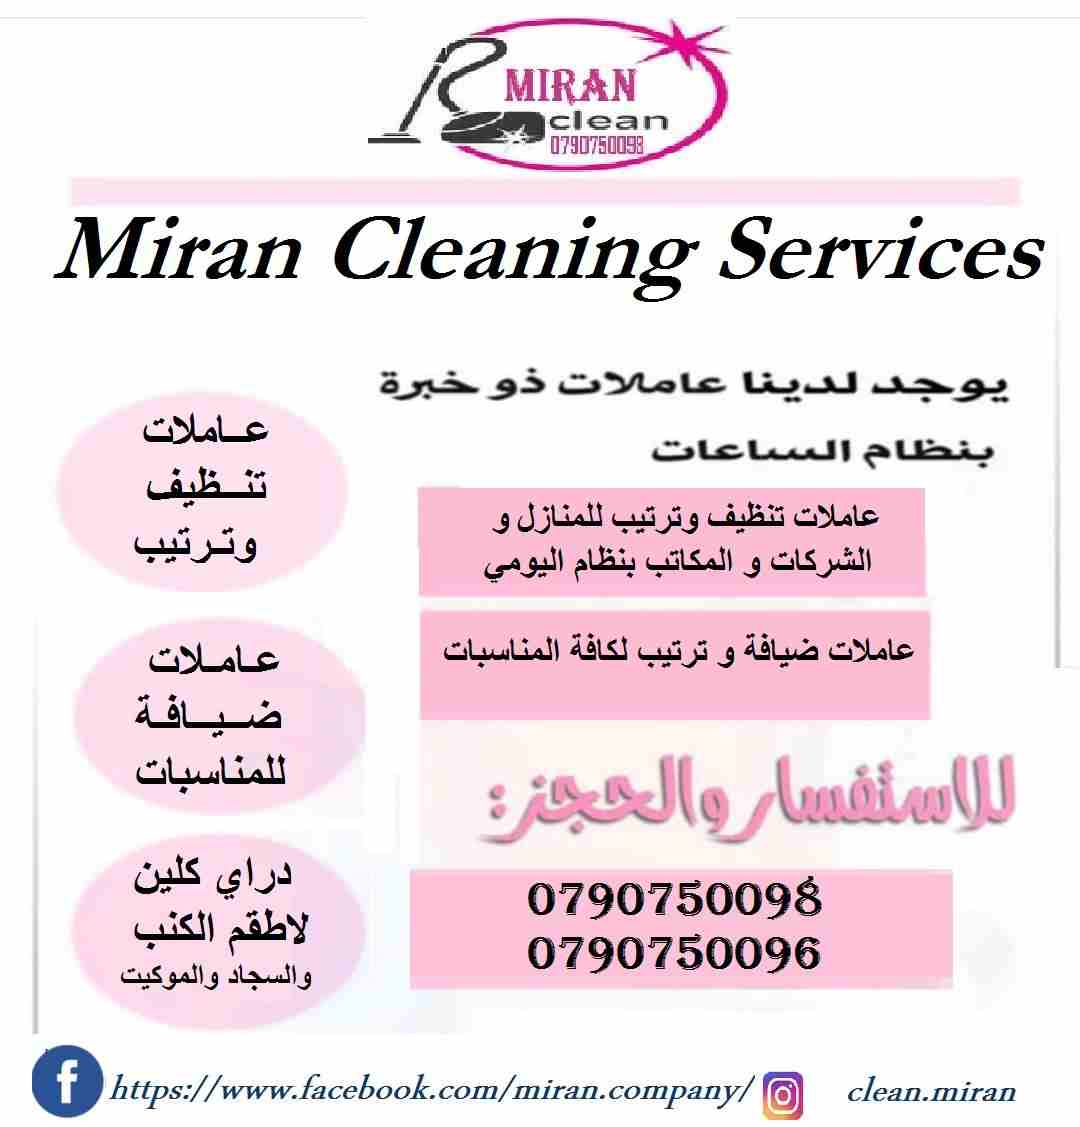 We provide Air Conditioning, General Maintenance and Duct Cleanings for Offices, Flats, Shops, Buildings & Villas at low cost. Call / WhatsApp 055-5269352 /-  بتبحثي عن التميز حتى...